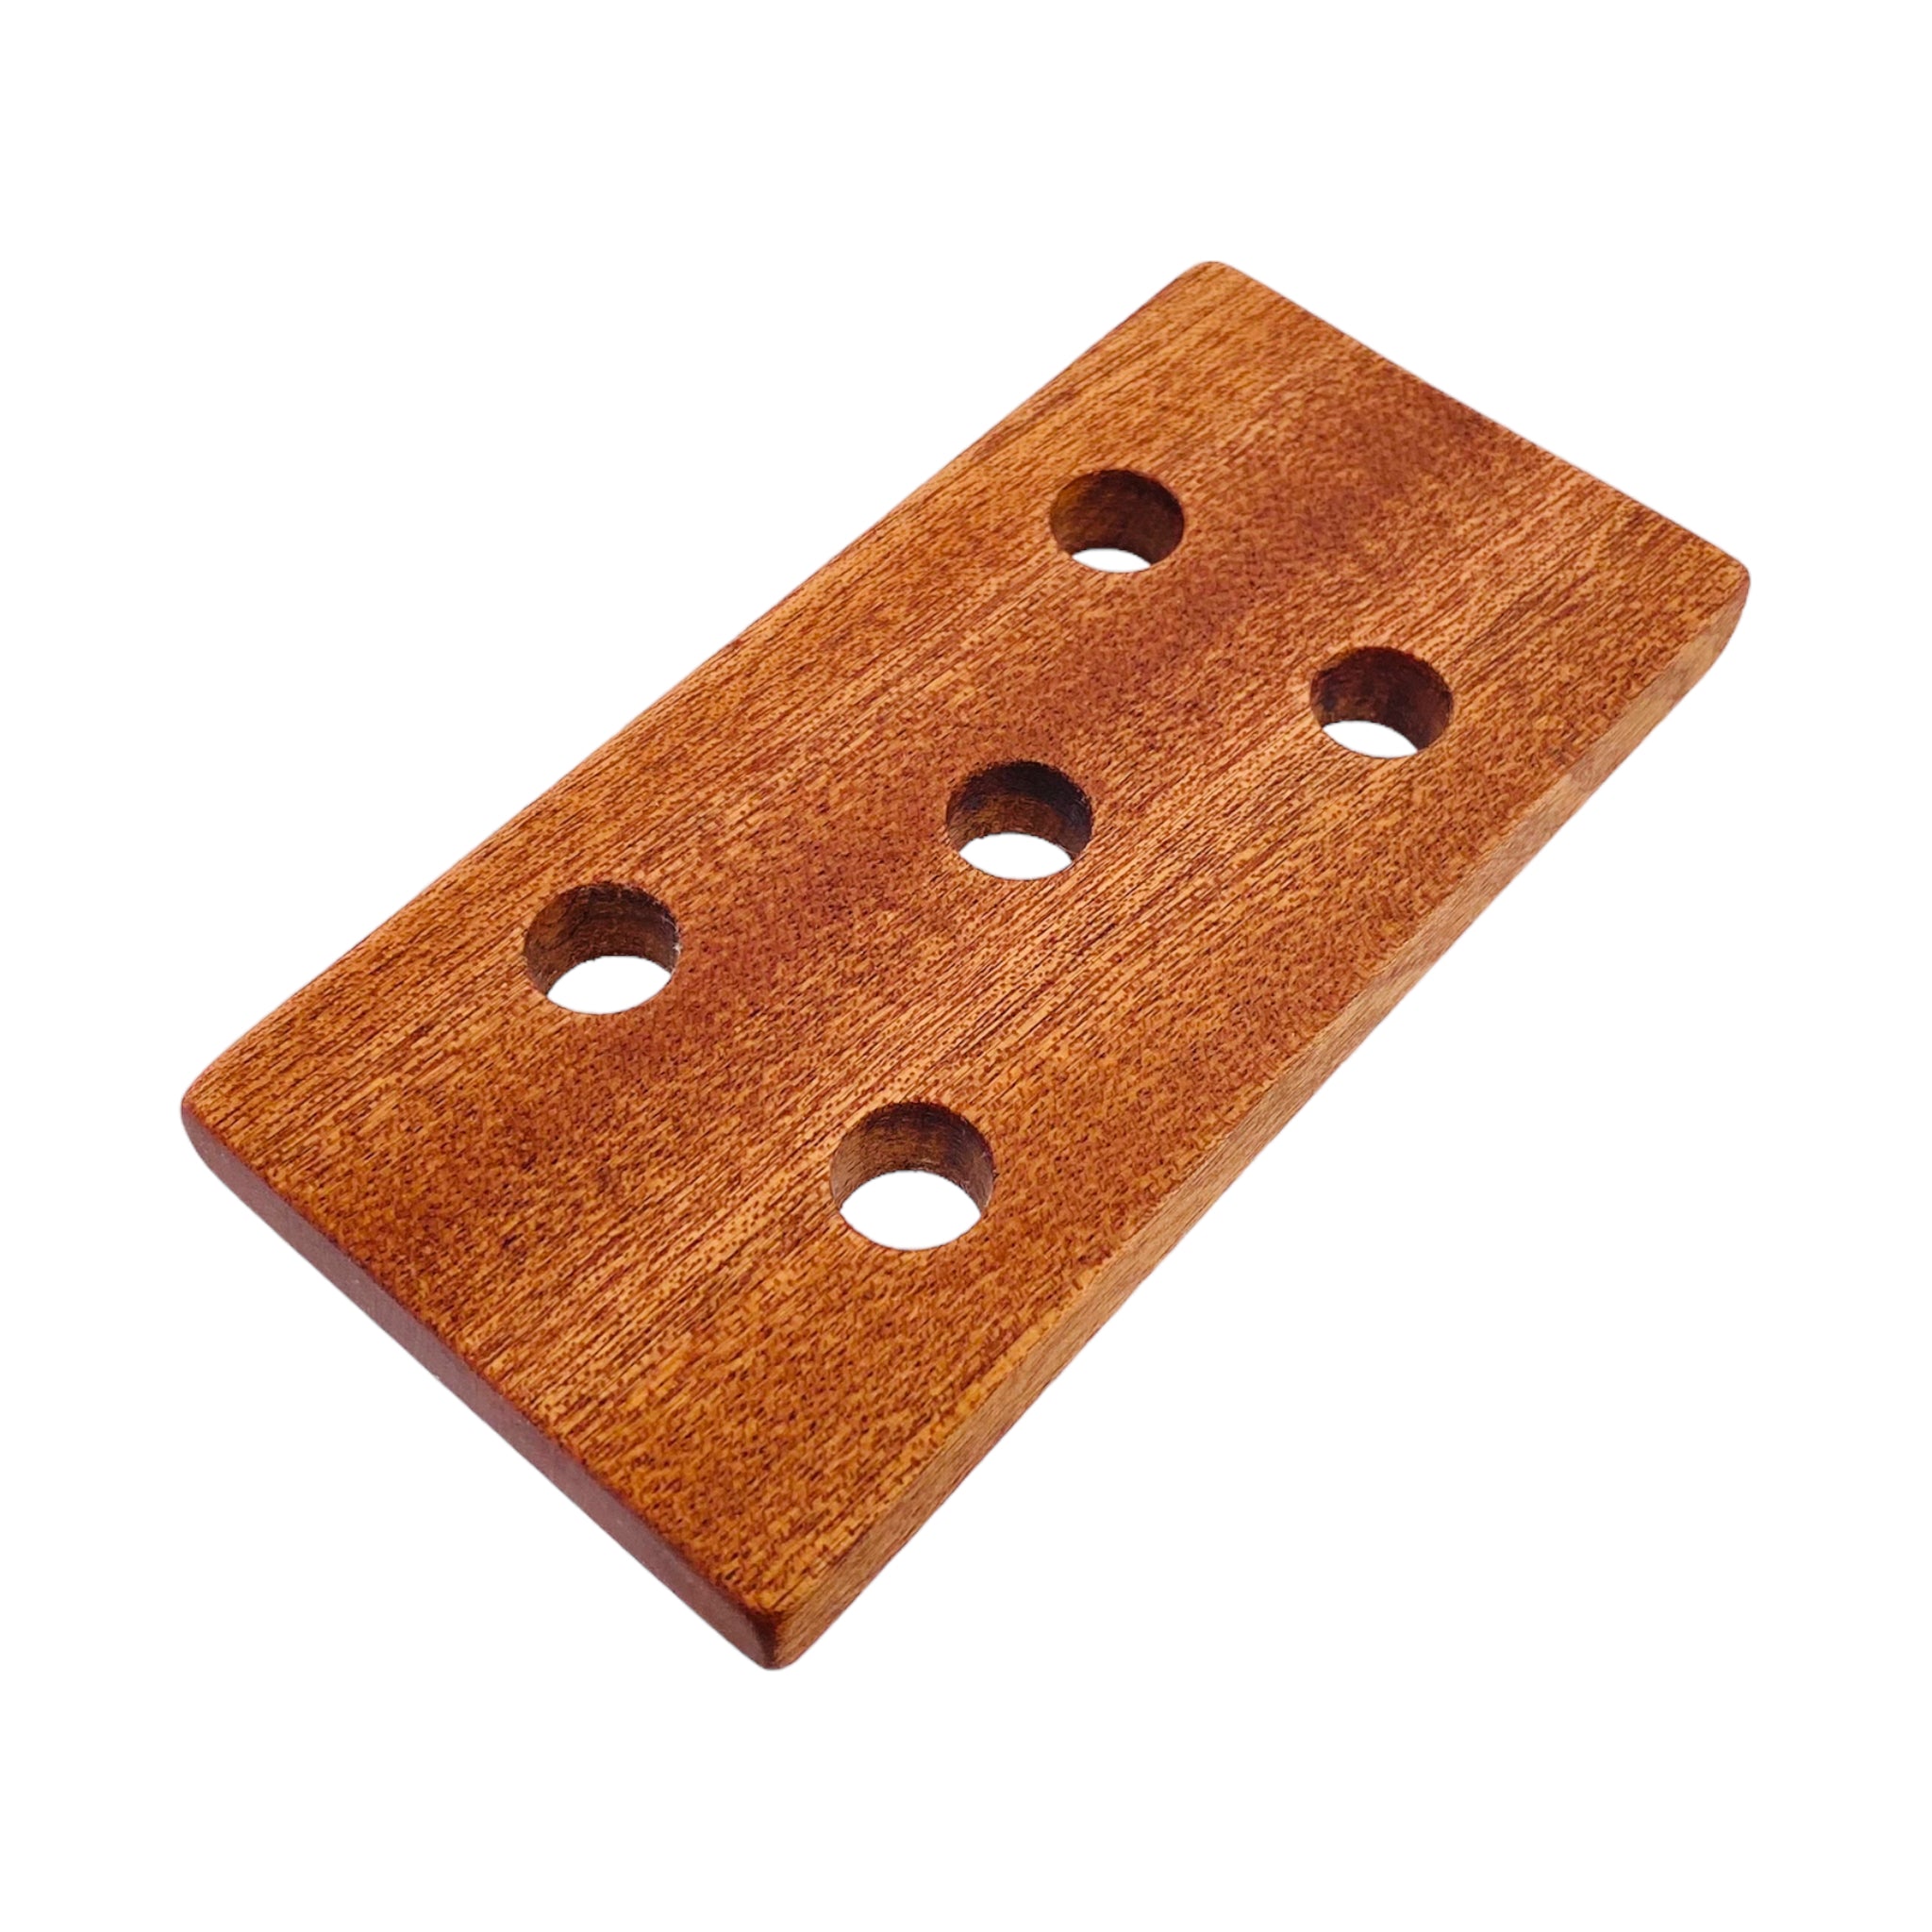 5 Hole Wood Display Stand Holder For 14mm Bong Bowl Pieces Or Quartz Bangers - Mahogany